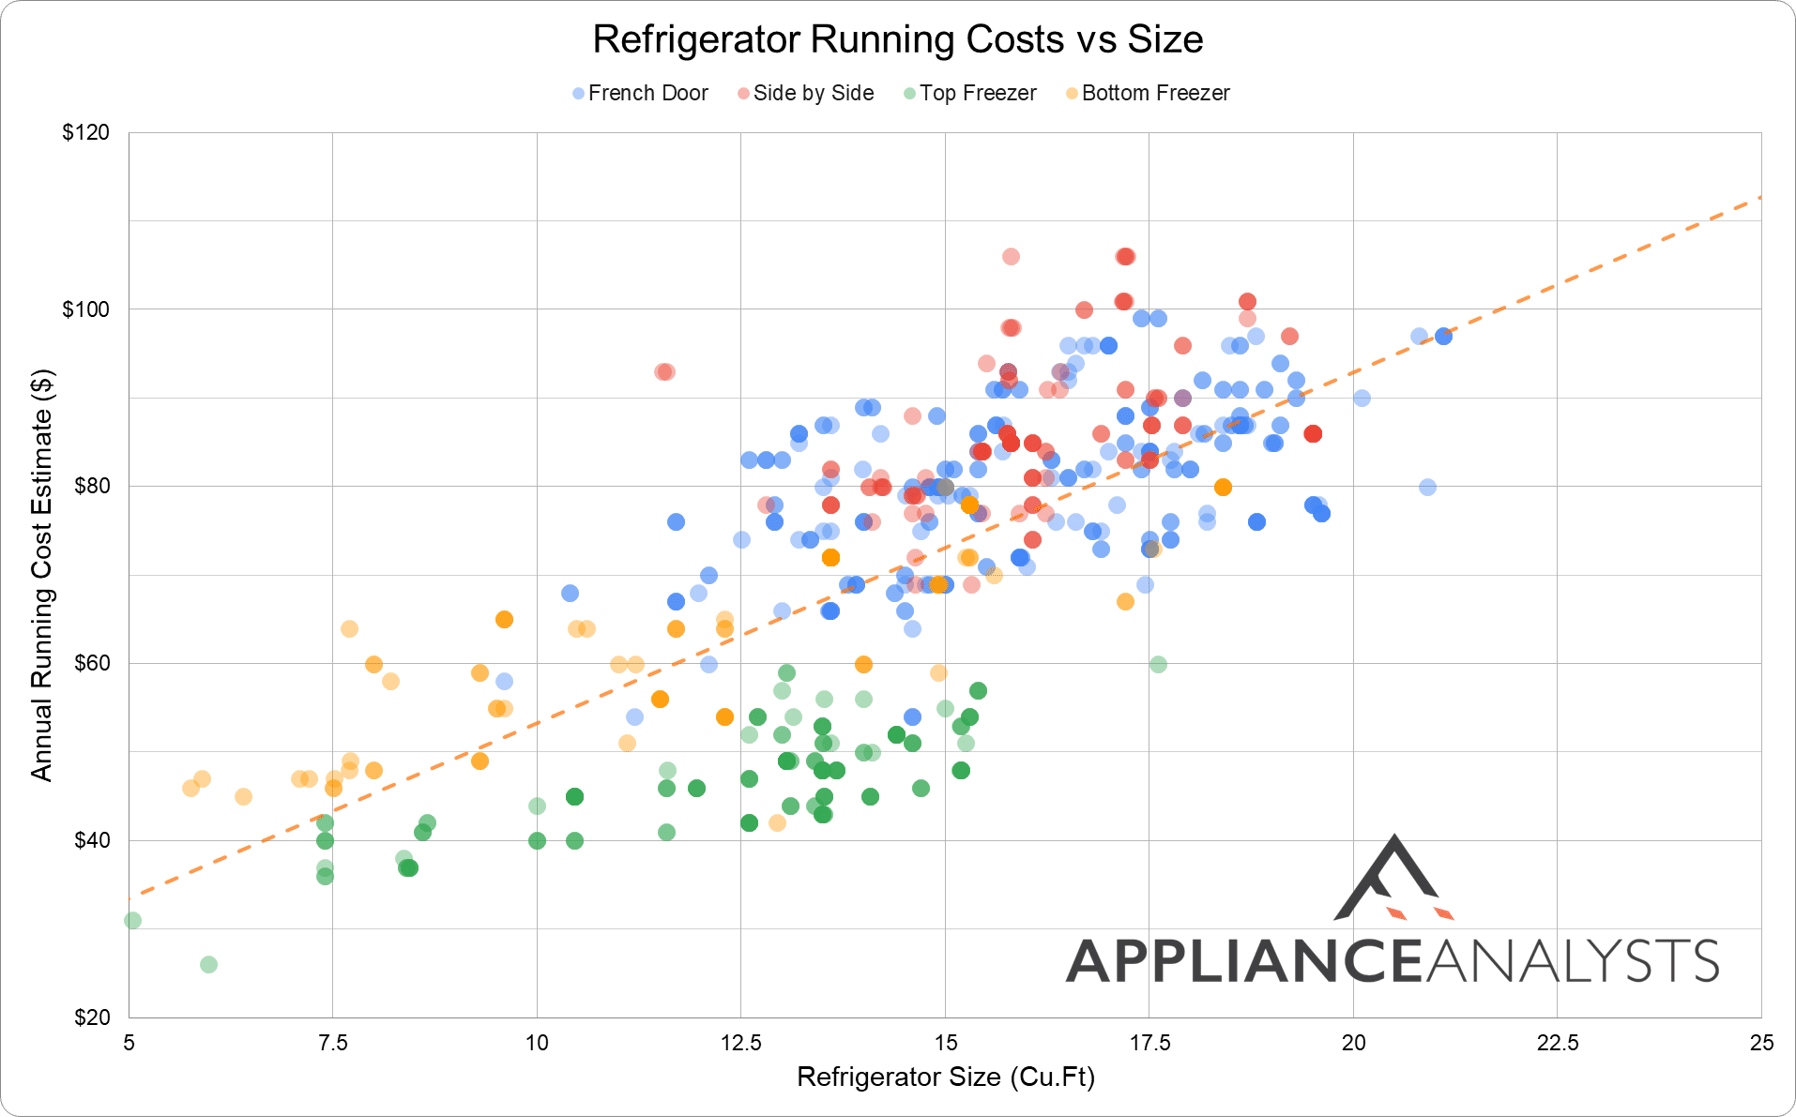 Graph showing the costs of running French Door, Side by Side, Top Freezer, and Bottom Freezer refrigerators